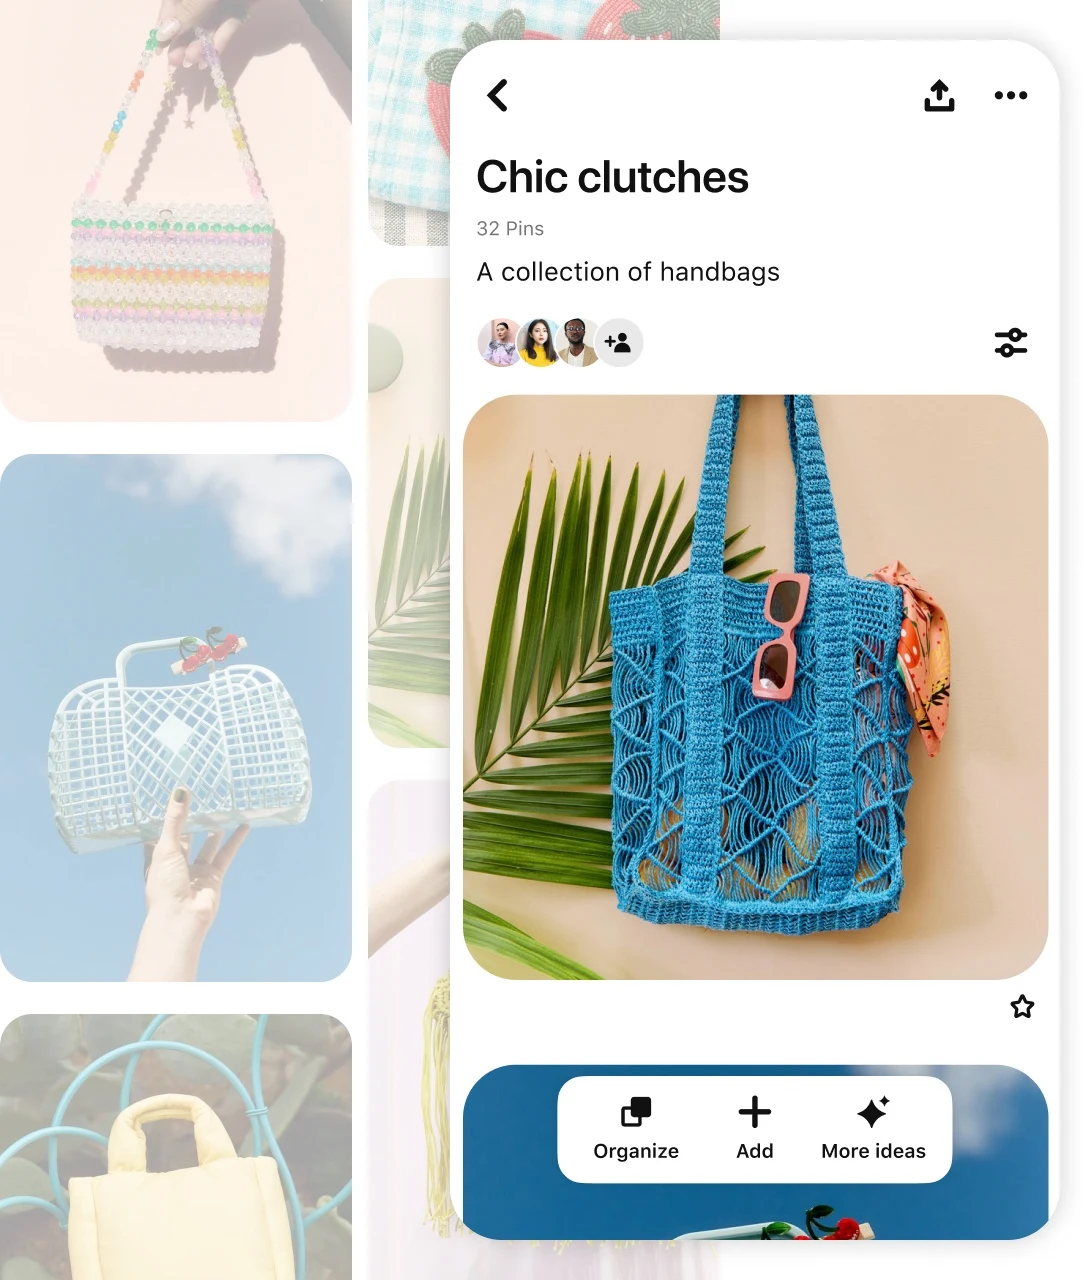 Pin grid including various purses with a featured Pin titled "Chic clutches"